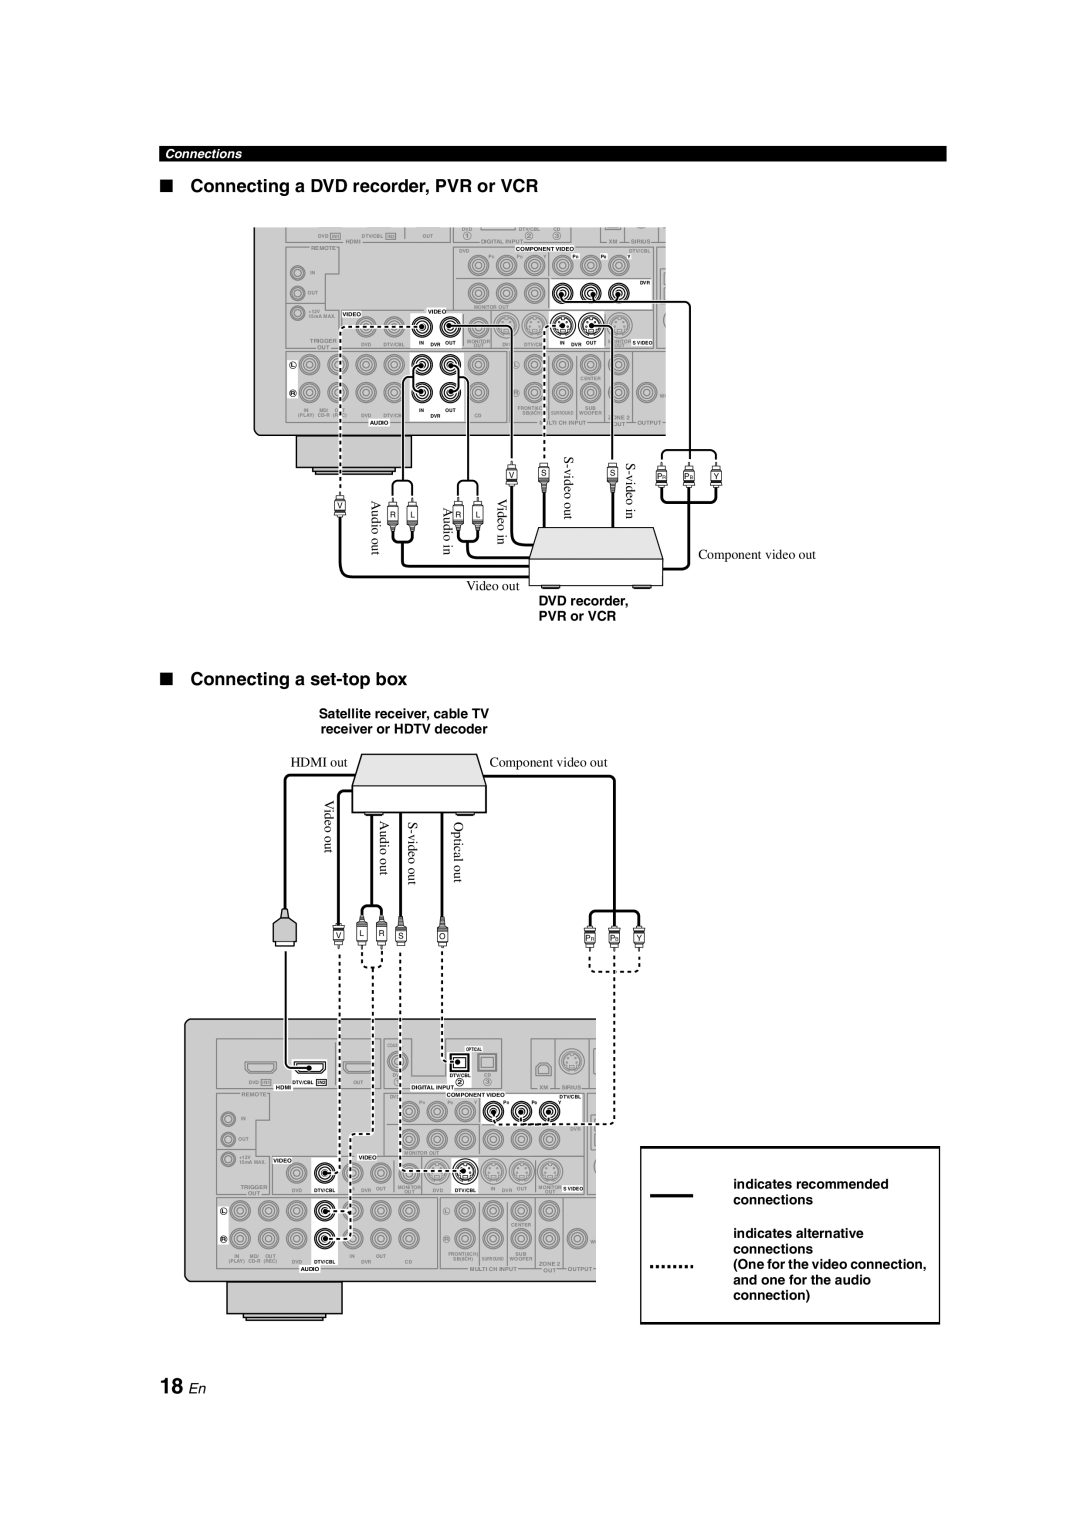 Yamaha HTR-6150 owner manual 18 En, Connecting a DVD recorder, PVR or VCR, Connecting a set-topbox, Connections 